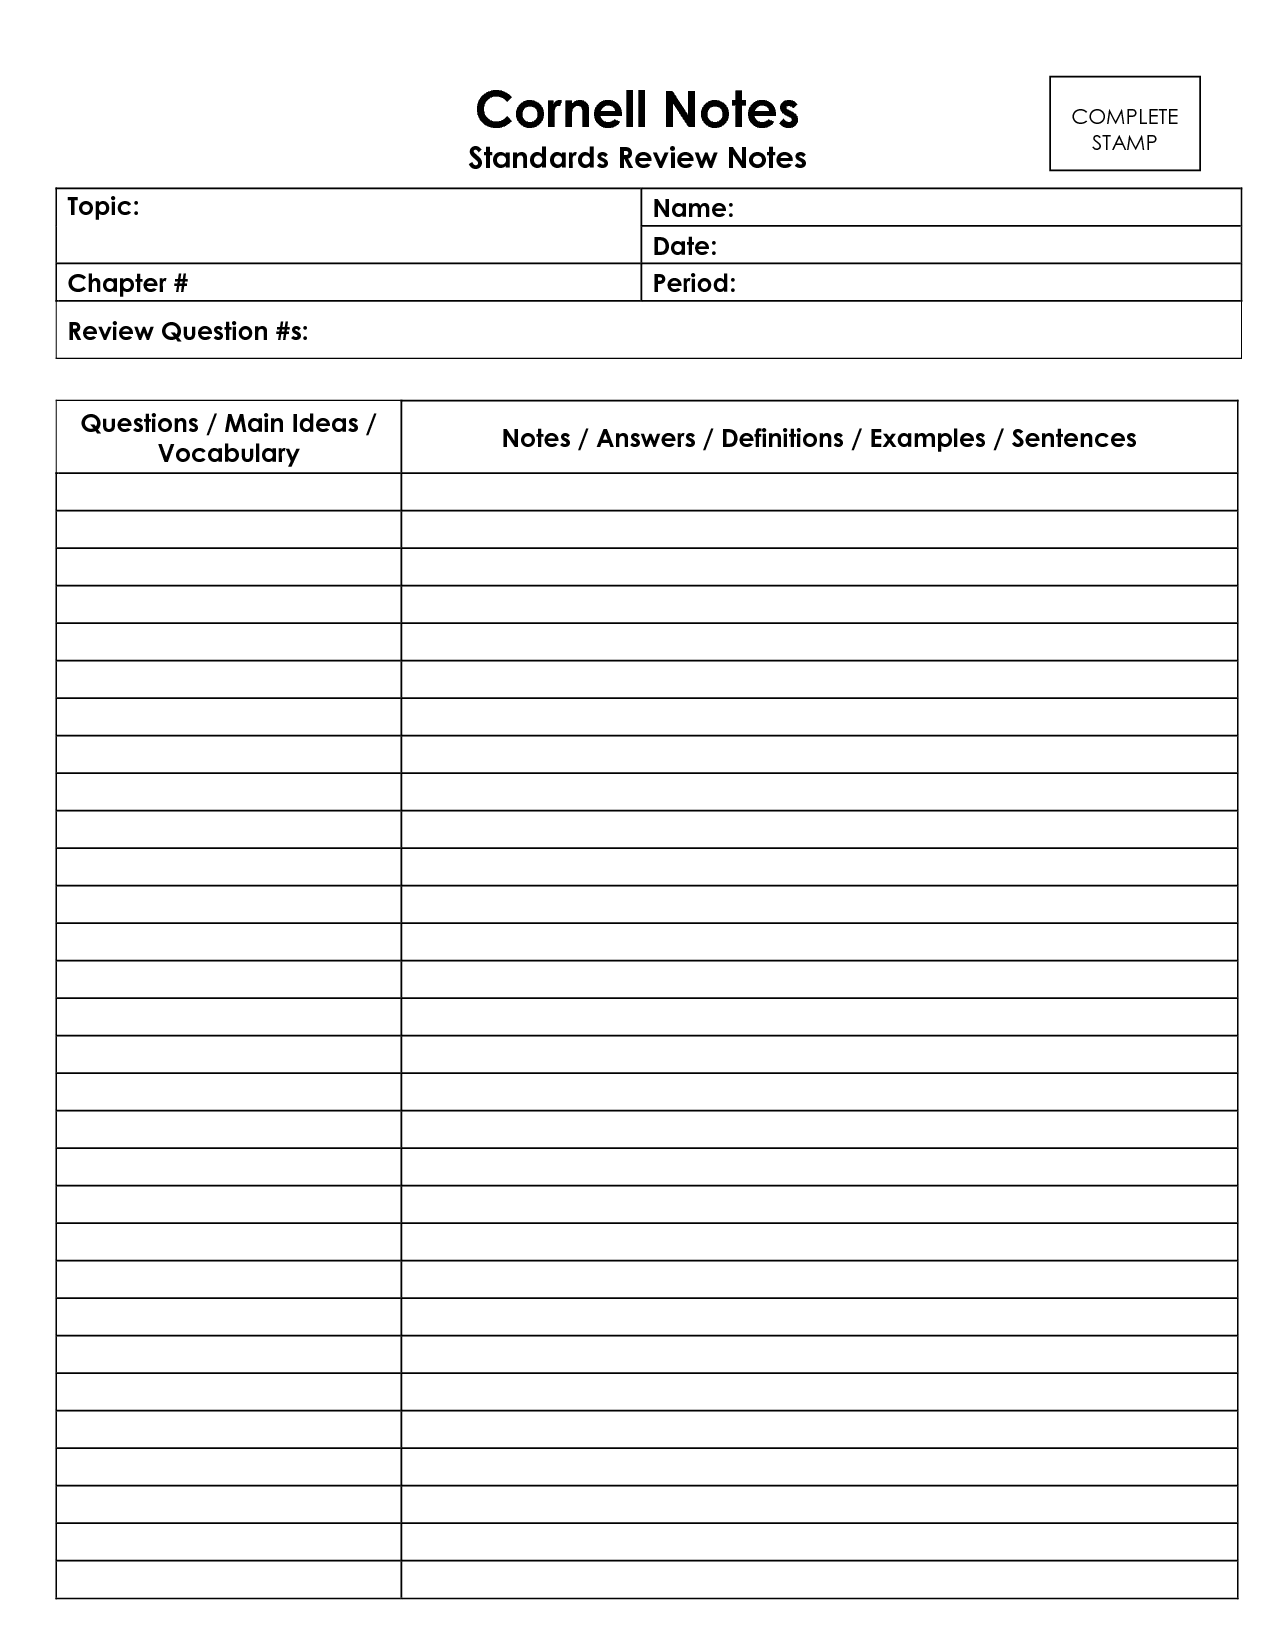 History (CORE) - Emmagji20 For Cornell Notes Template Doc